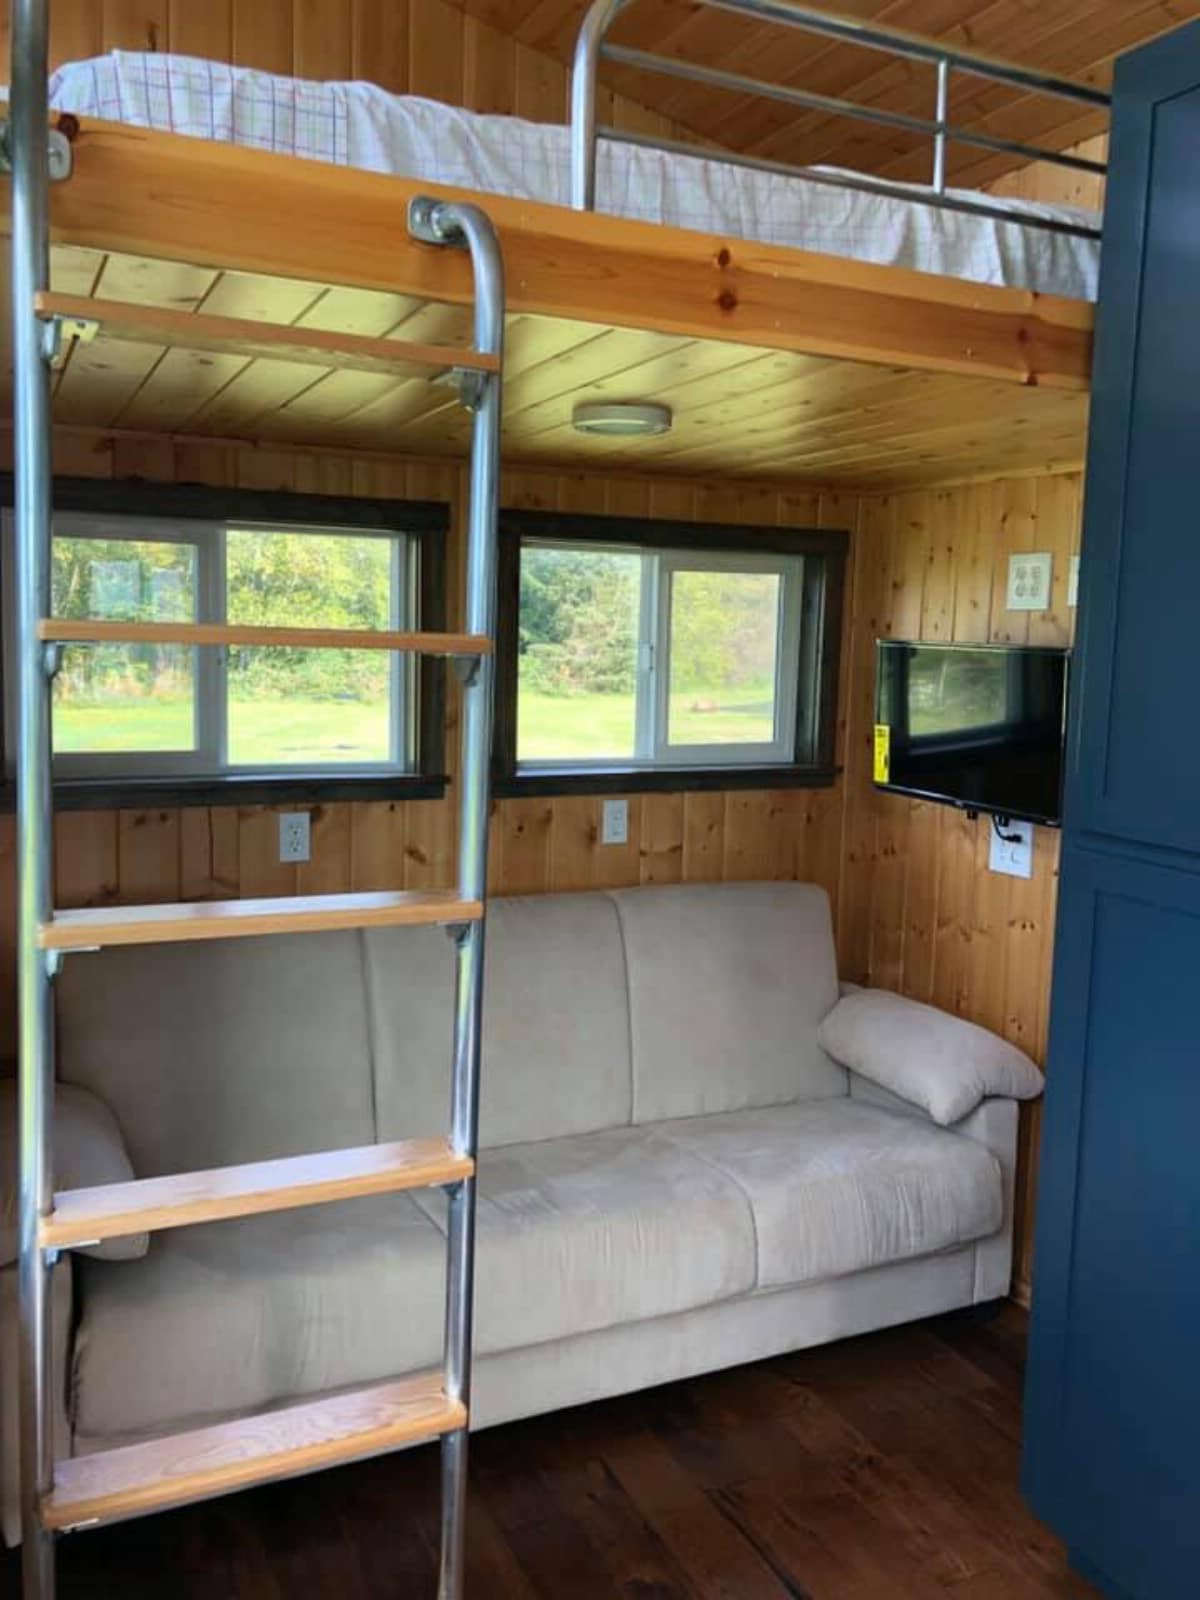 Couch and windows in tiny house